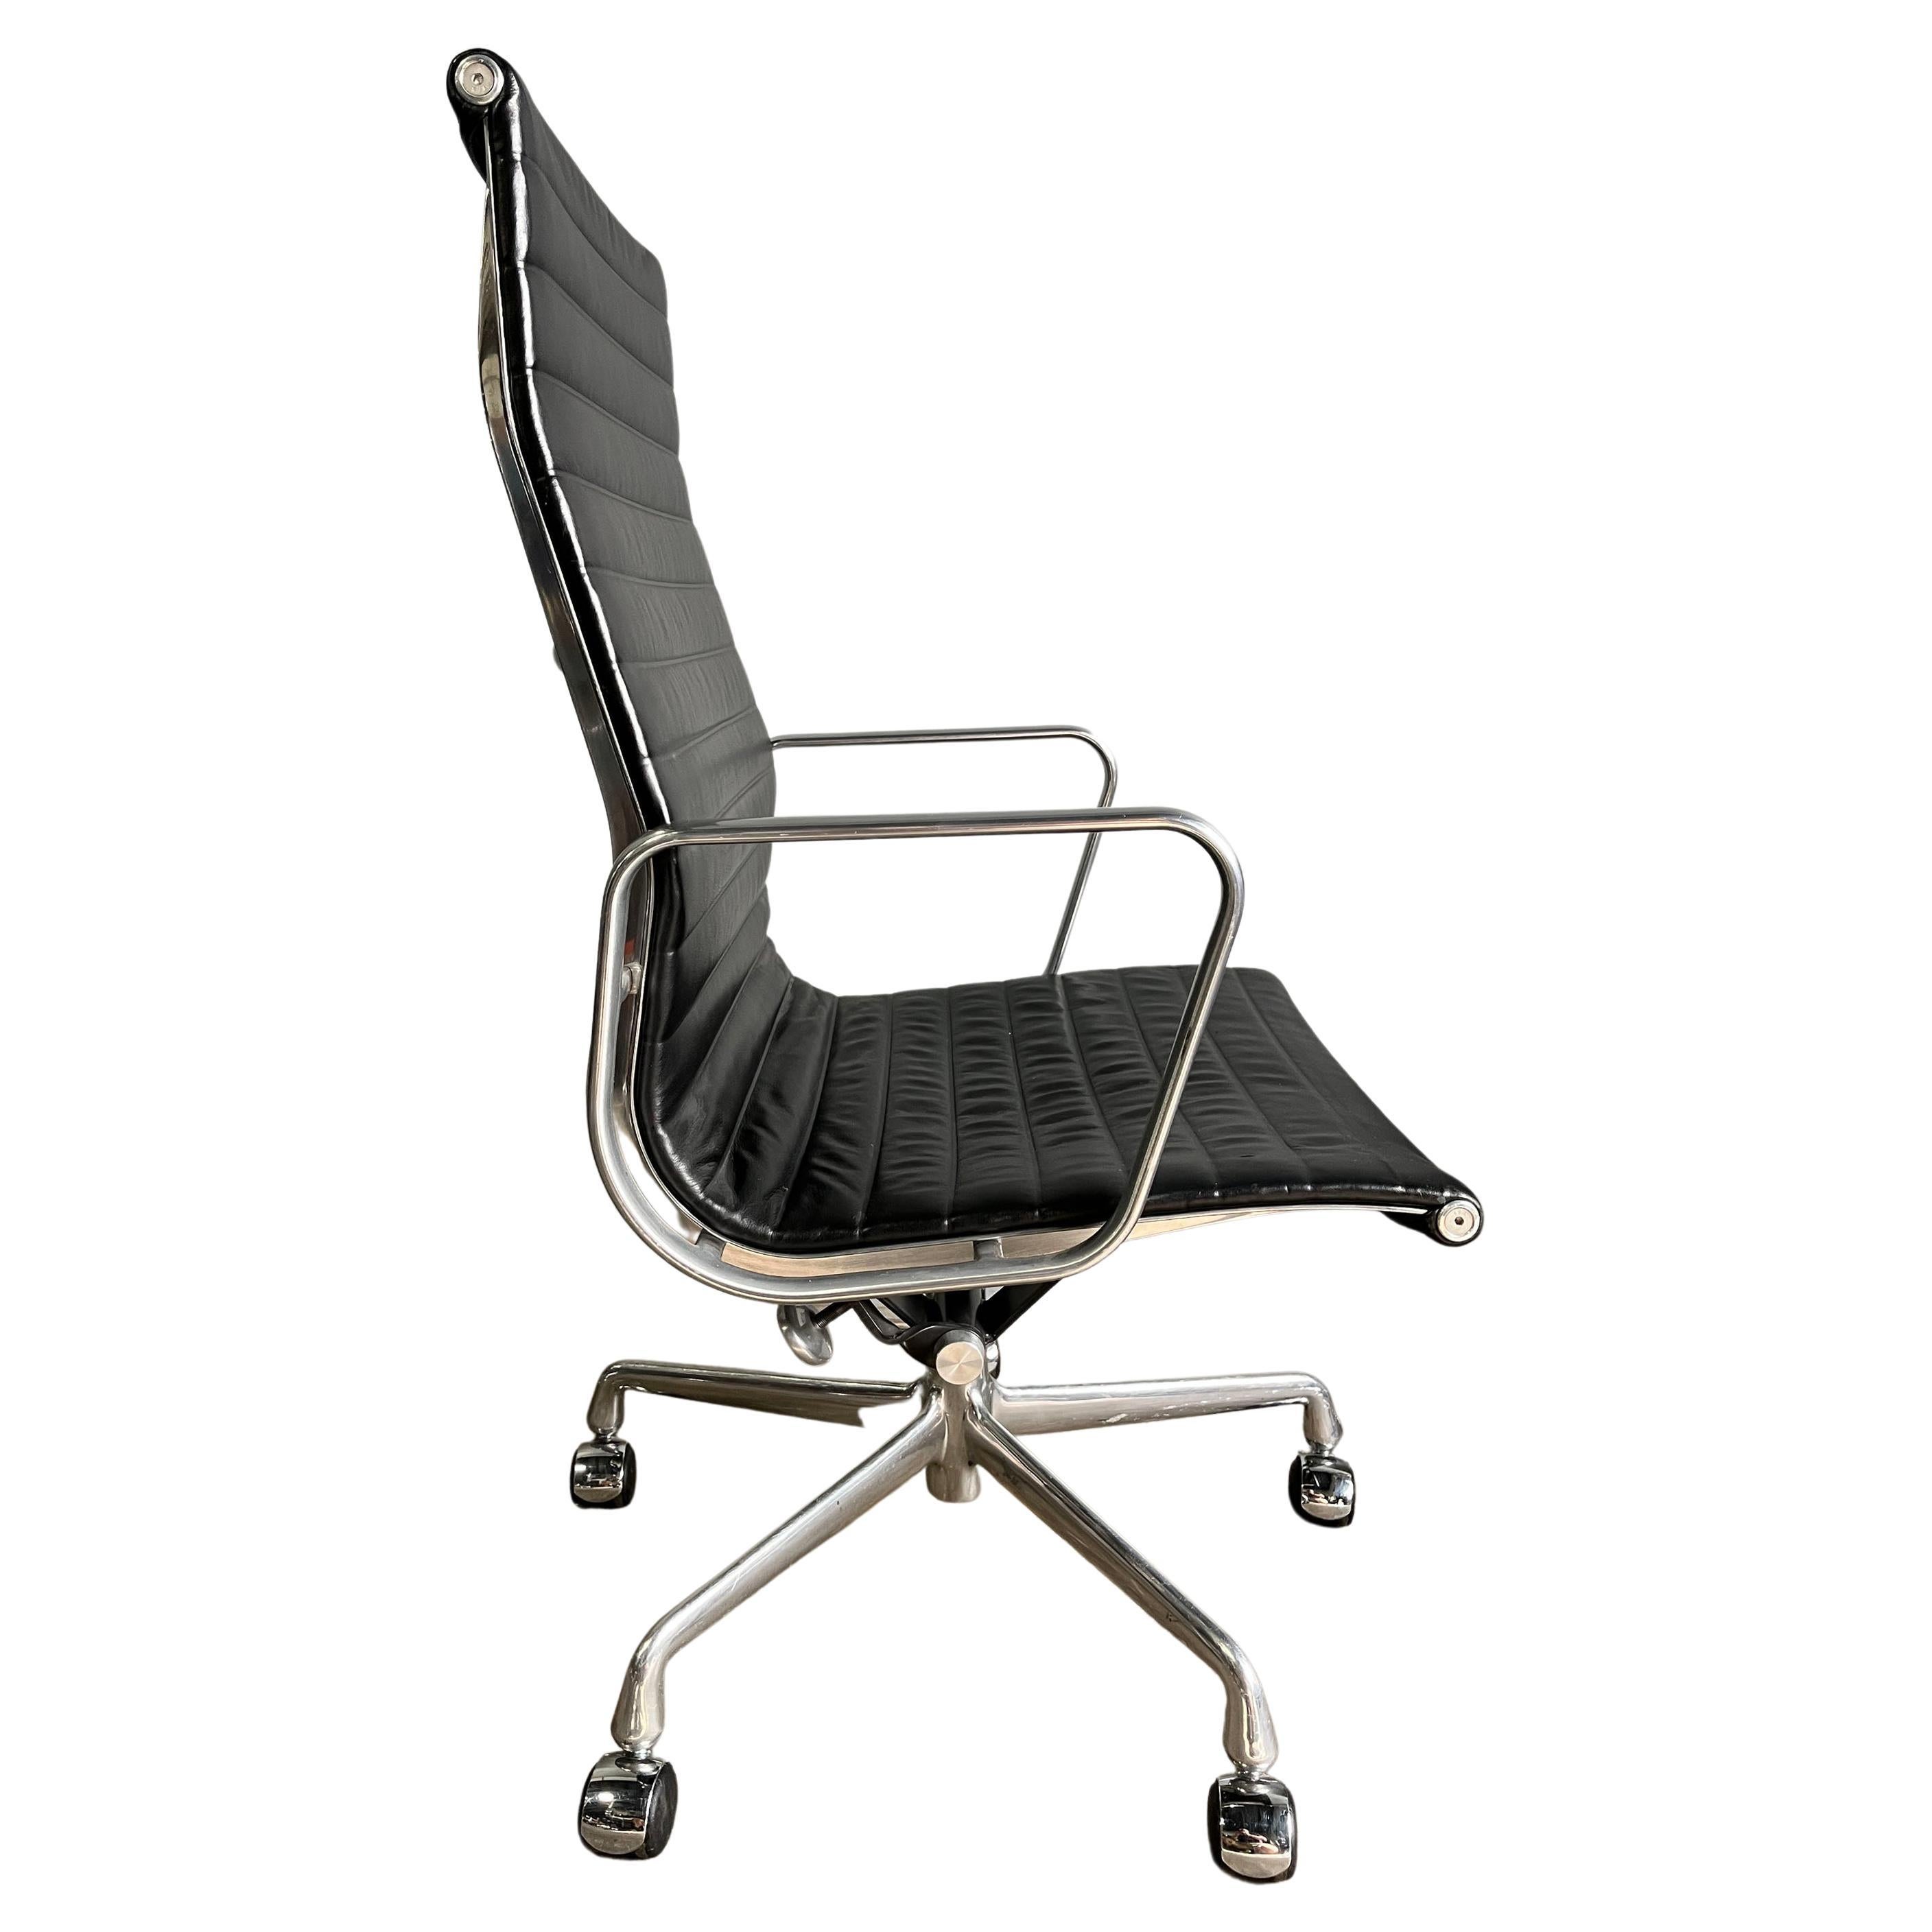 Ask for custom shipping quote

For sale are these authentic Eames for Herman Miller Aluminum Group chairs in premium plush black leather with high-backs. An icon of Mid Century Modern design that continues to be produced today. Manual height and